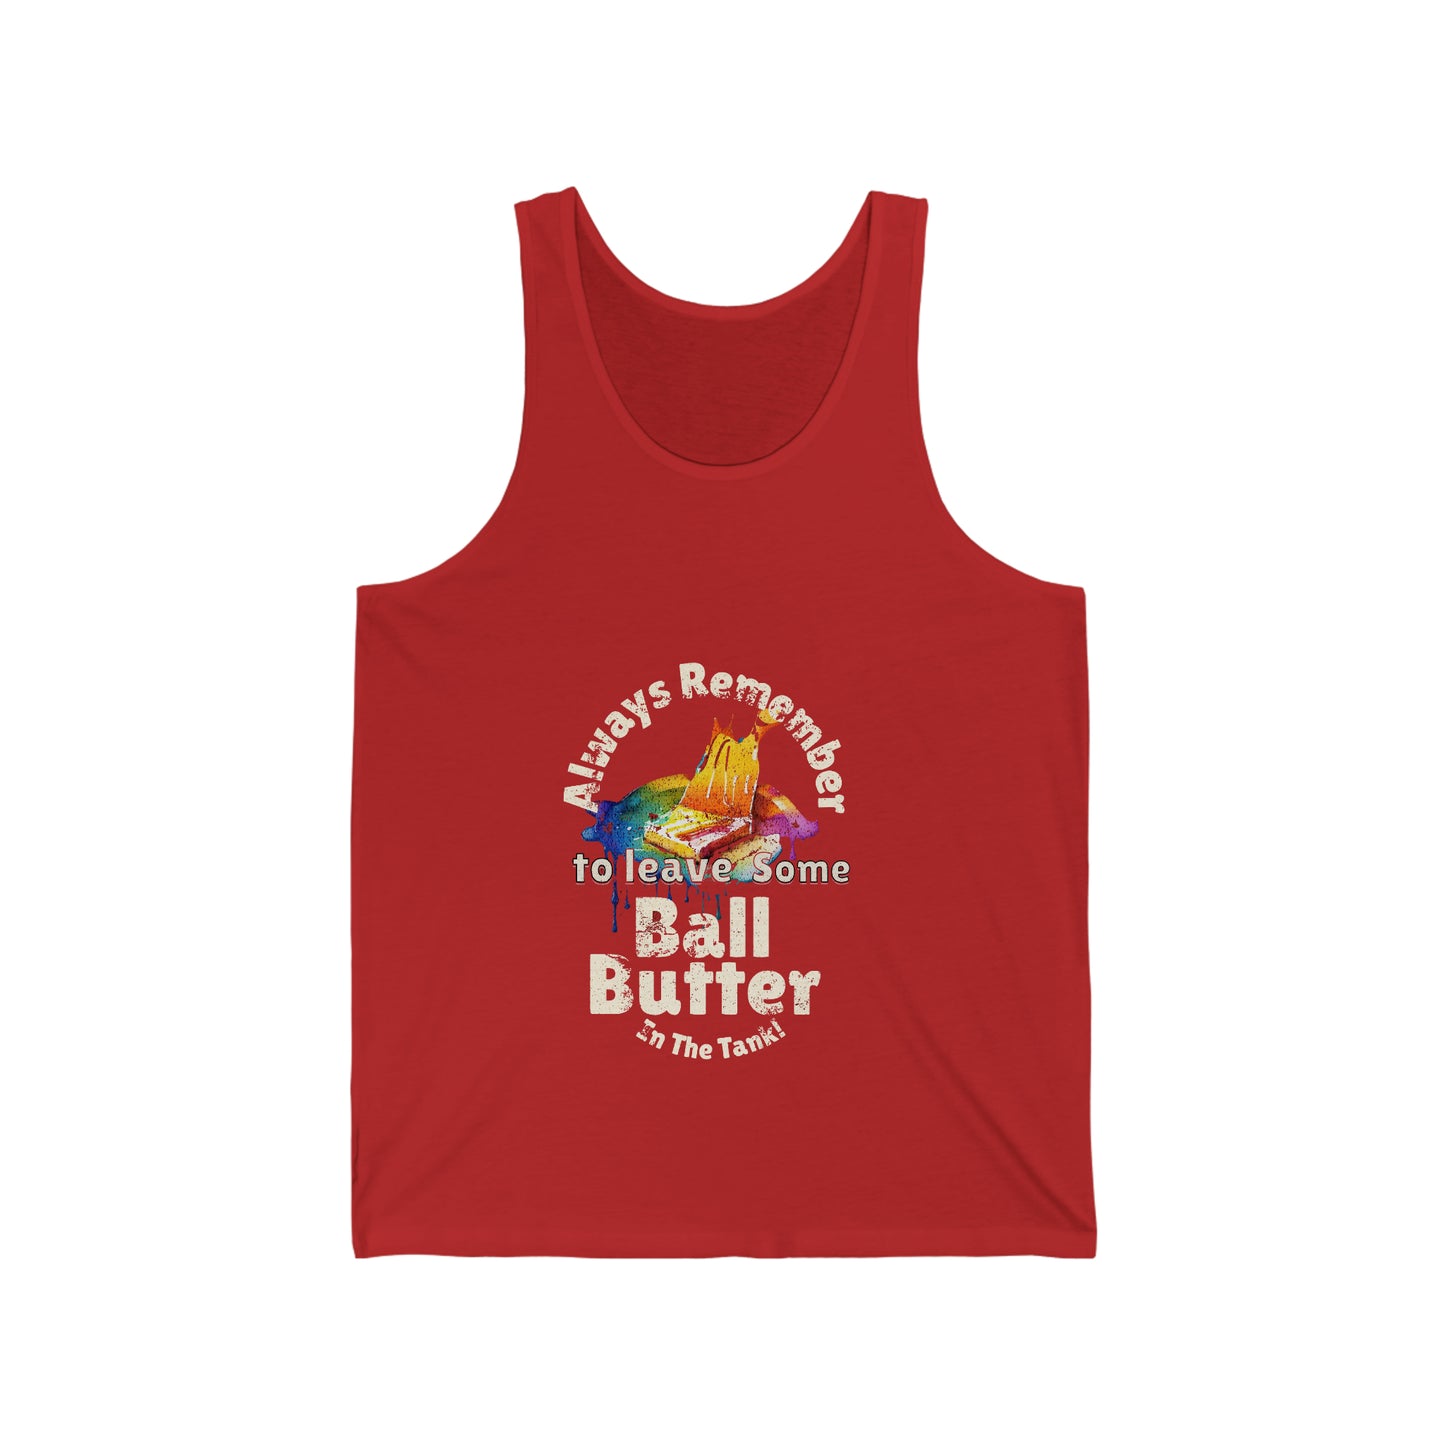 Always Remember to Leave Some Ball Butter in the Tank Unisex Jersey Tank, Humorous Fitness Apparel, Trendy Urban Top, Gift for Gym Enthusiasts, Funny Graphic Tank Top